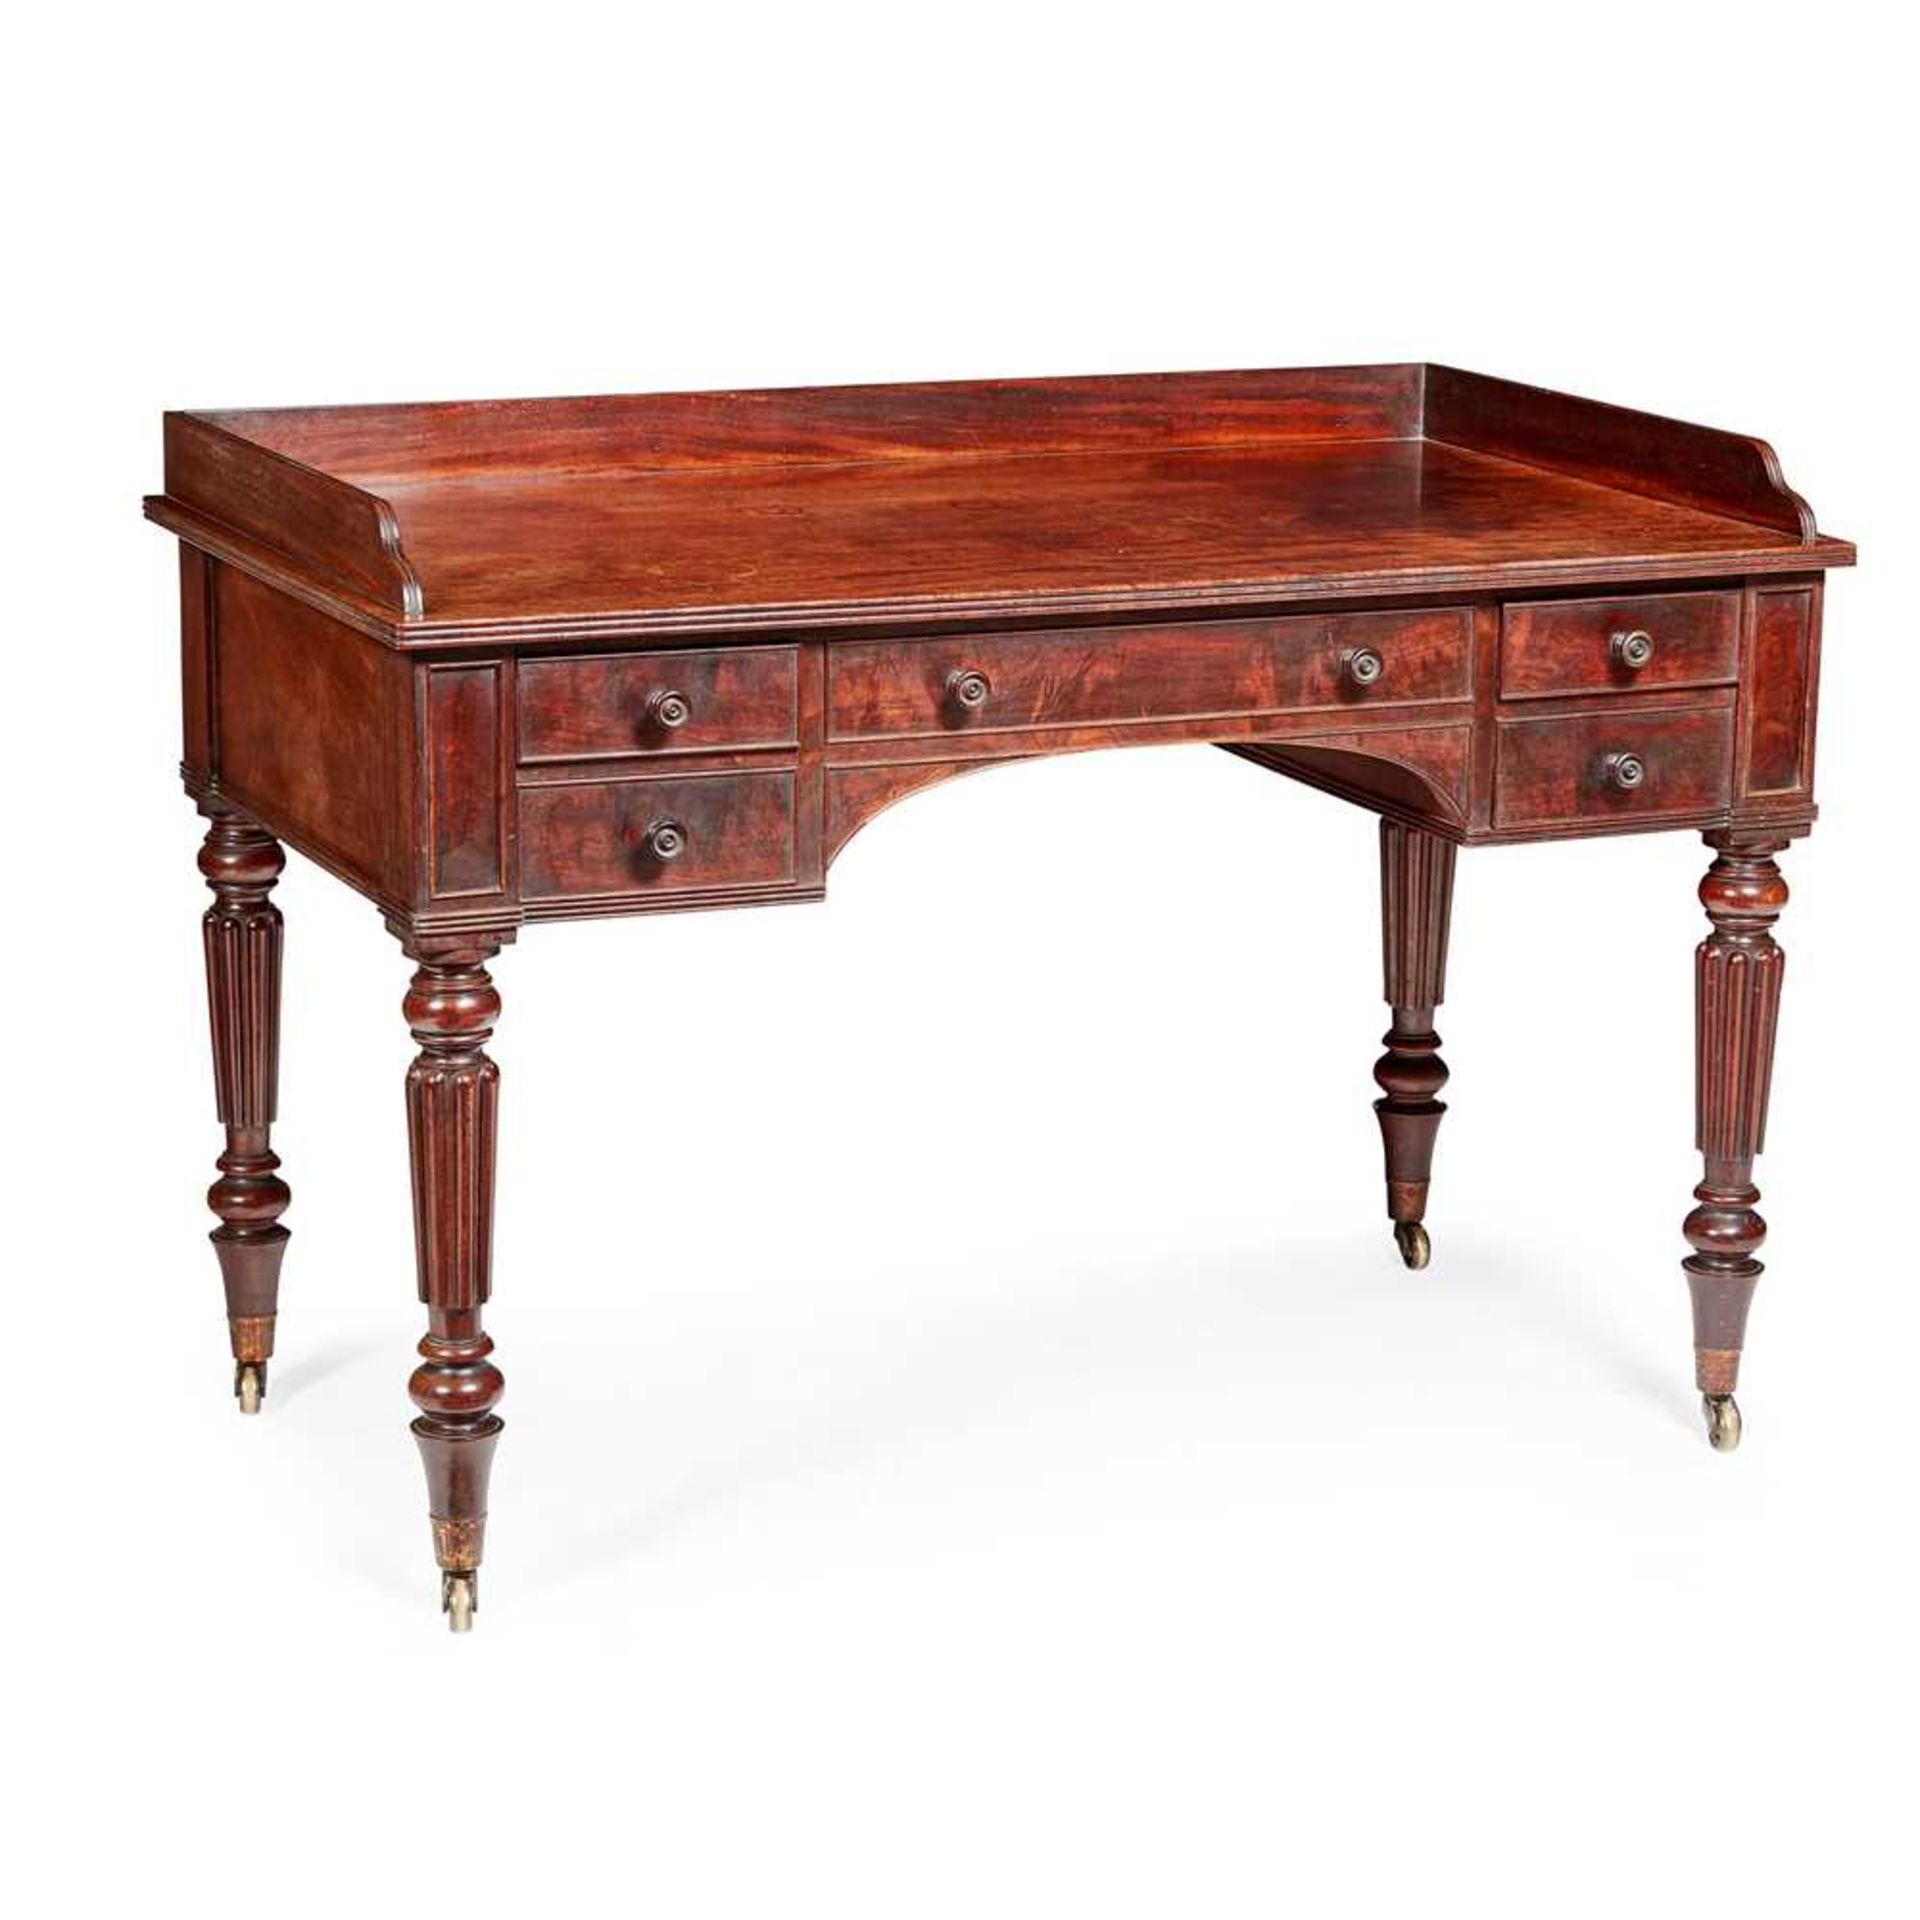 REGENCY MAHOGANY WASHSTAND, IN THE MANNER OF GILLOWS EARLY 19TH CENTURY